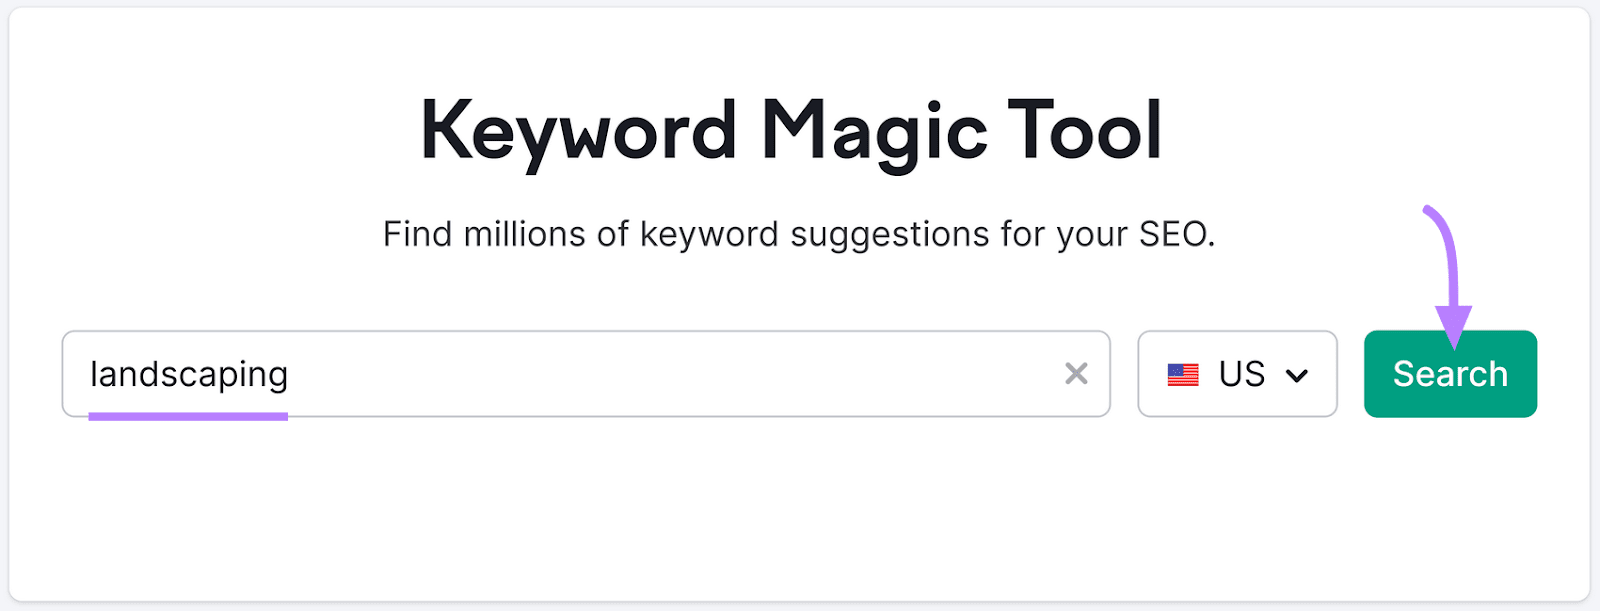 "landscaping" entered into the Keyword Magic Tool hunt  bar